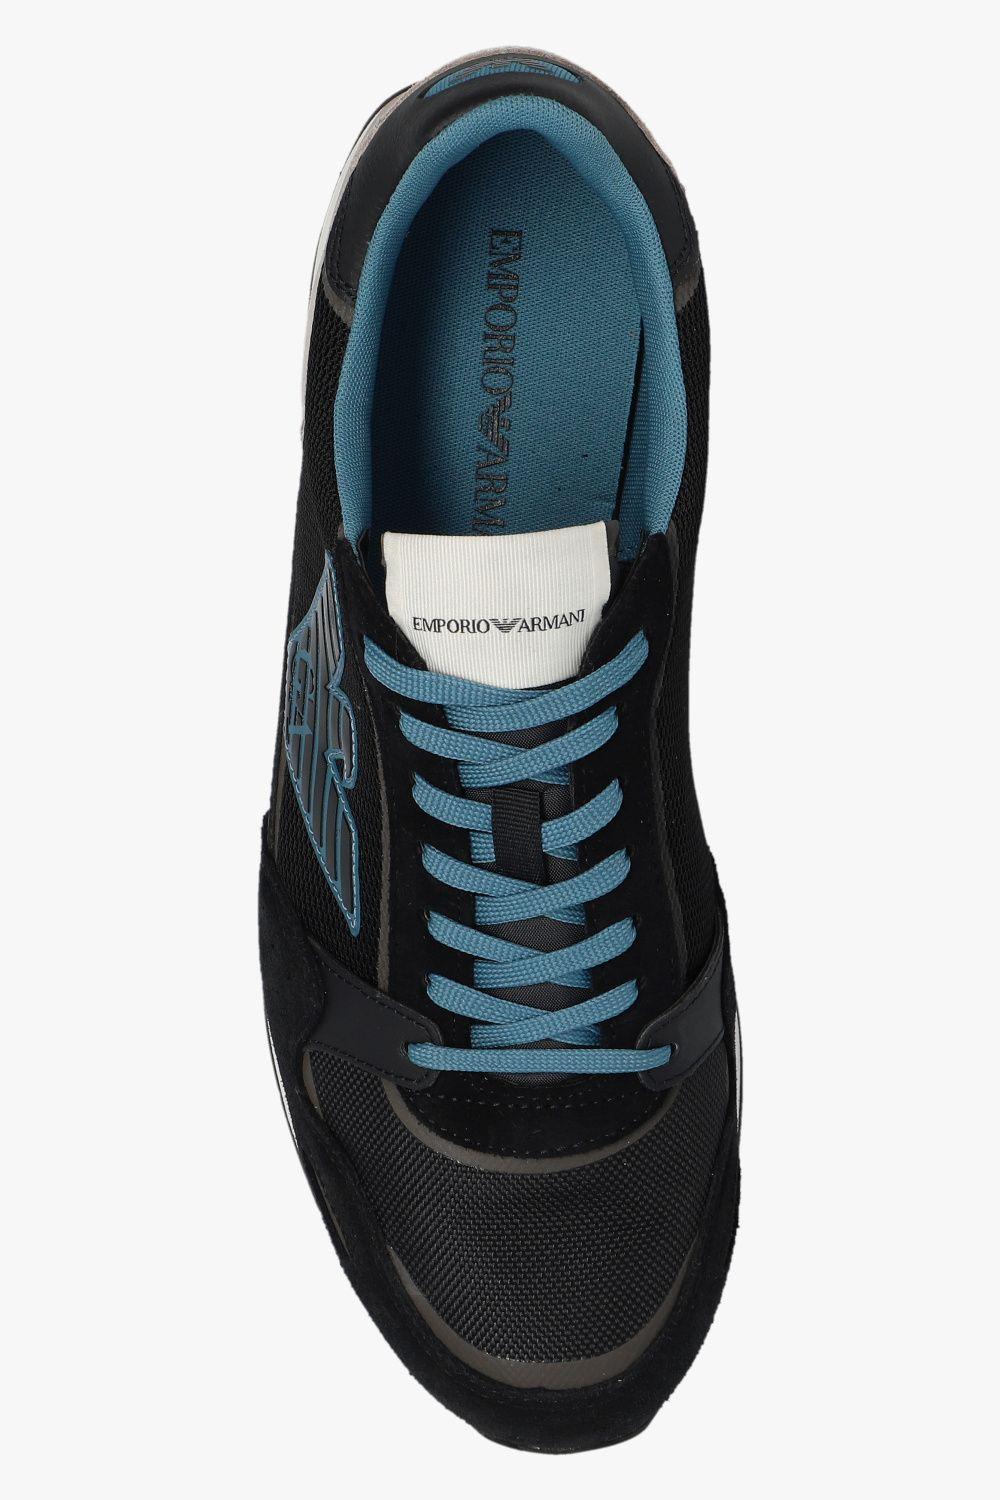 Emporio Armani Sneakers With Logo in Black for Men | Lyst